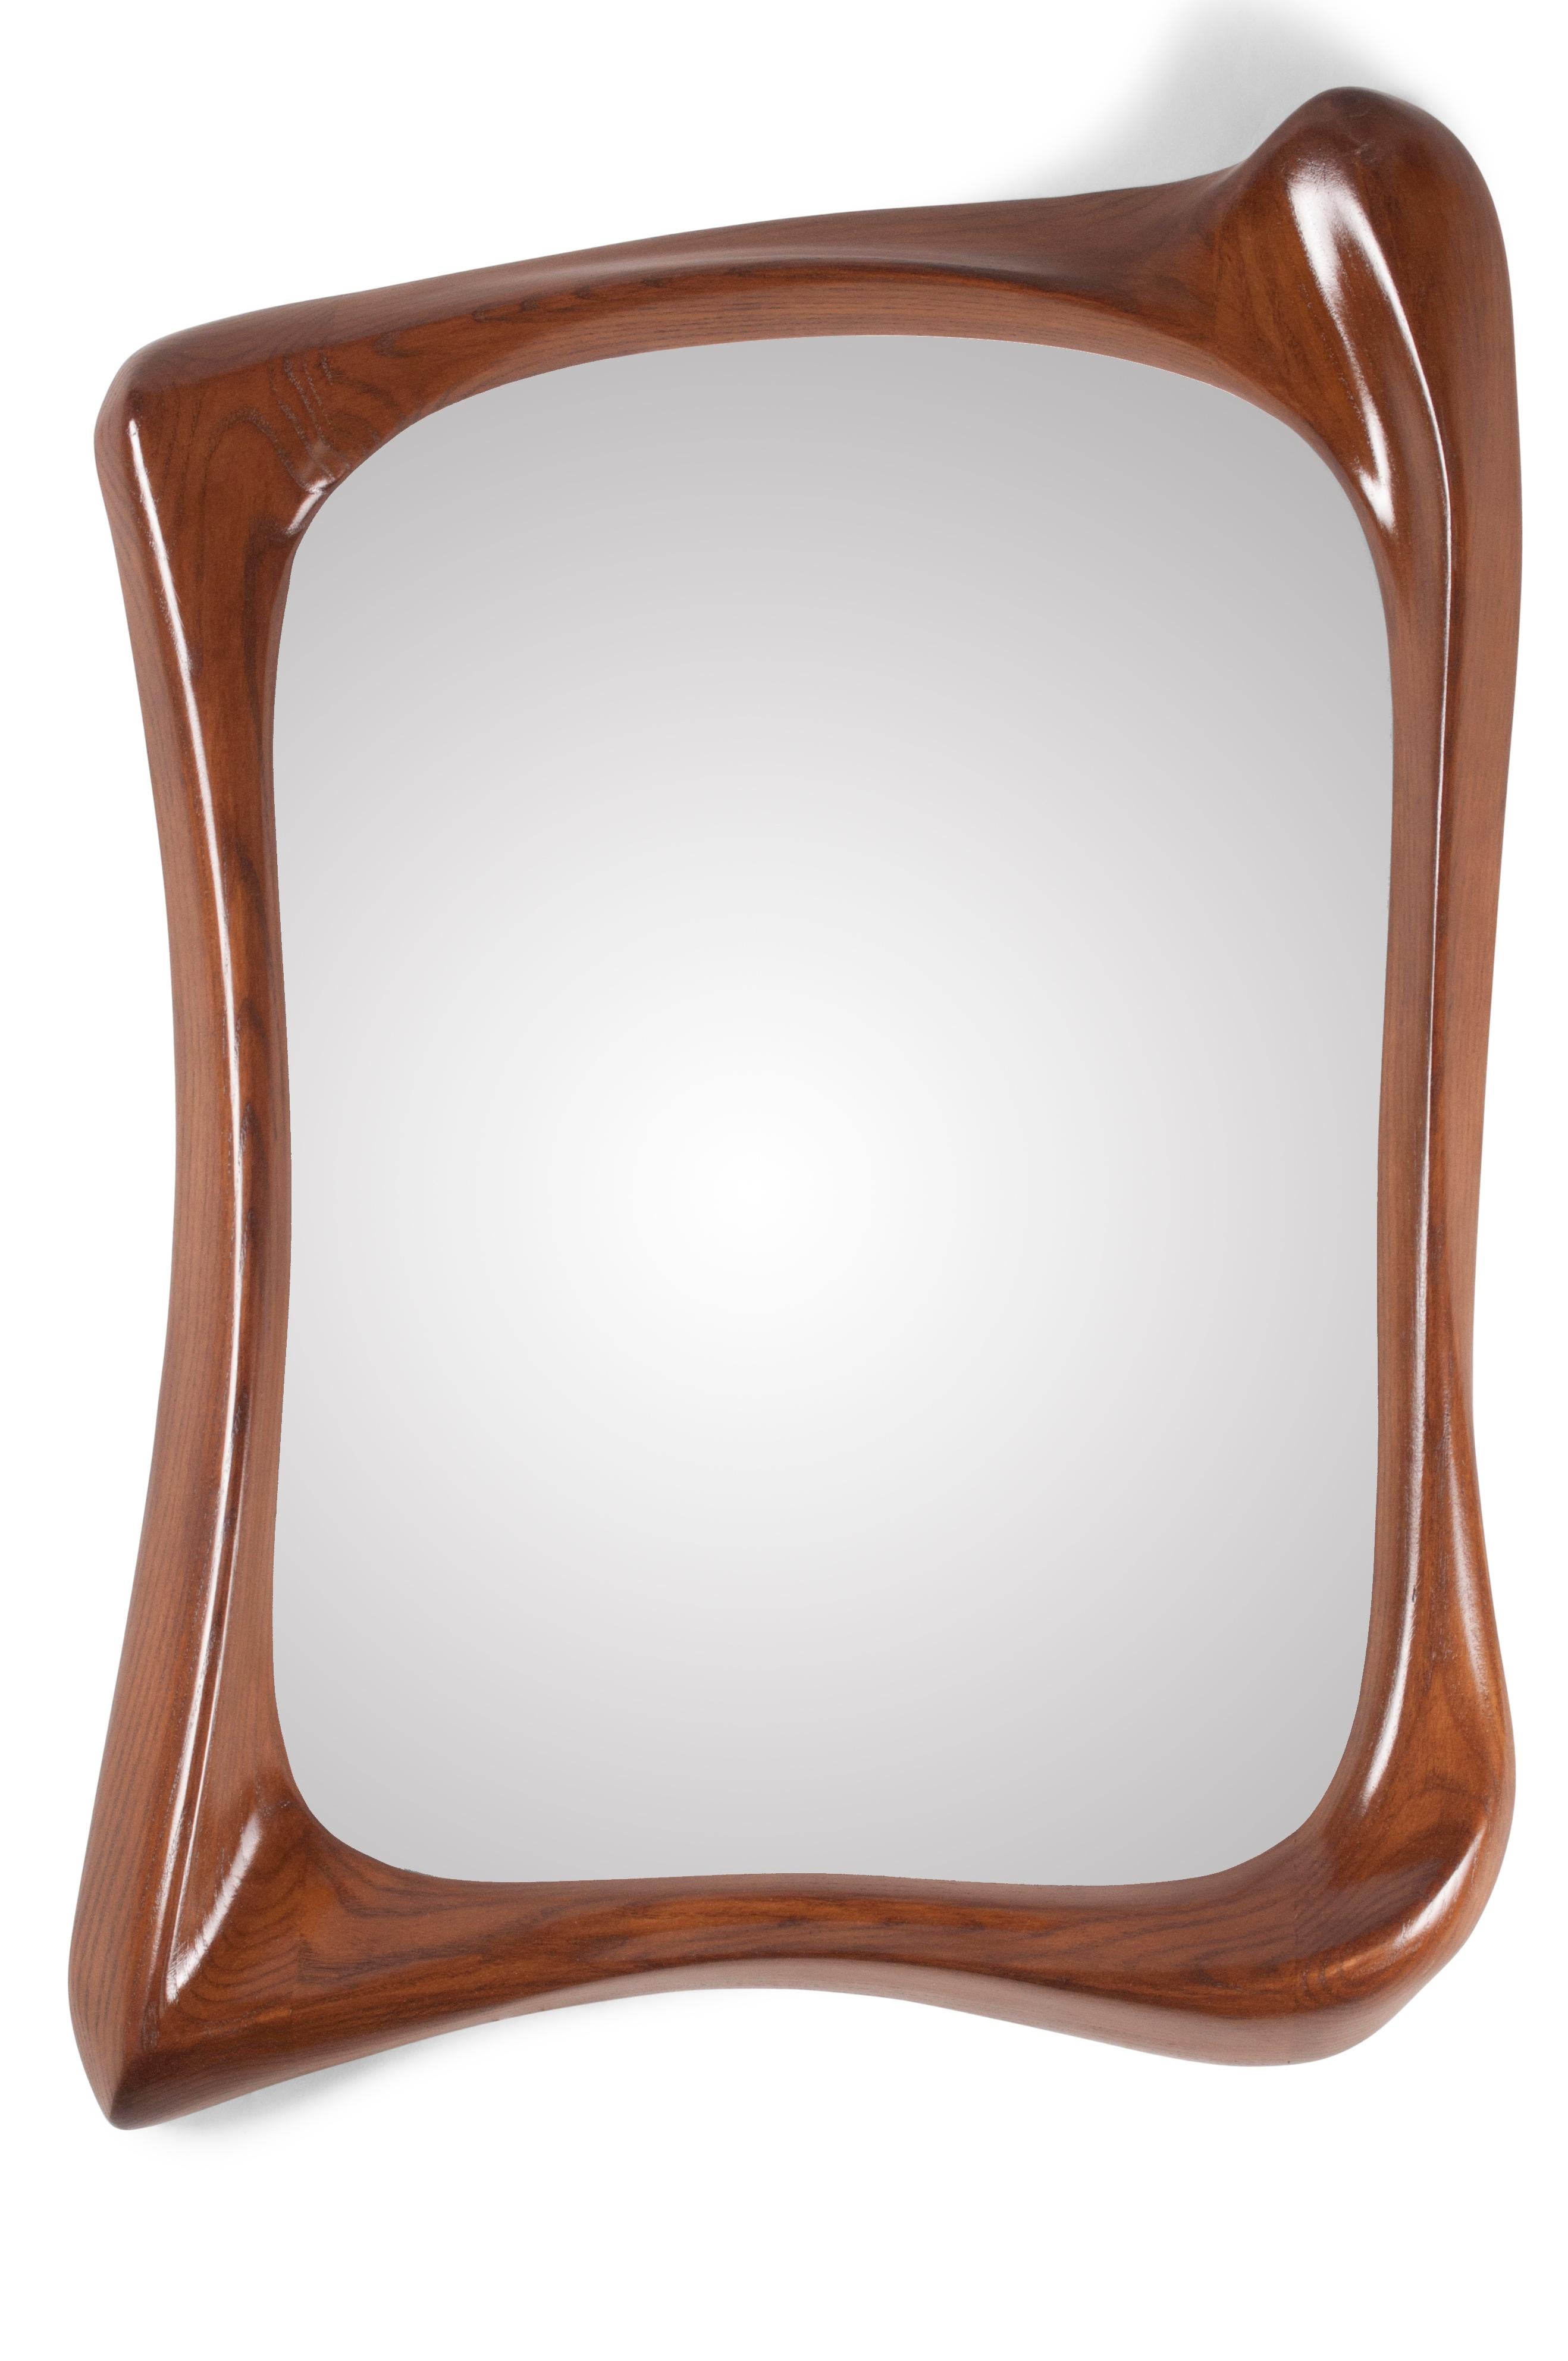 Narcissus Mirror with Walnut stained finish on Ash Wood.

About Amorph: 
Amorph is a design and manufacturing company based in Los Angeles, California. We take pride in hand crafted designs connected to technology to create sophisticated, design